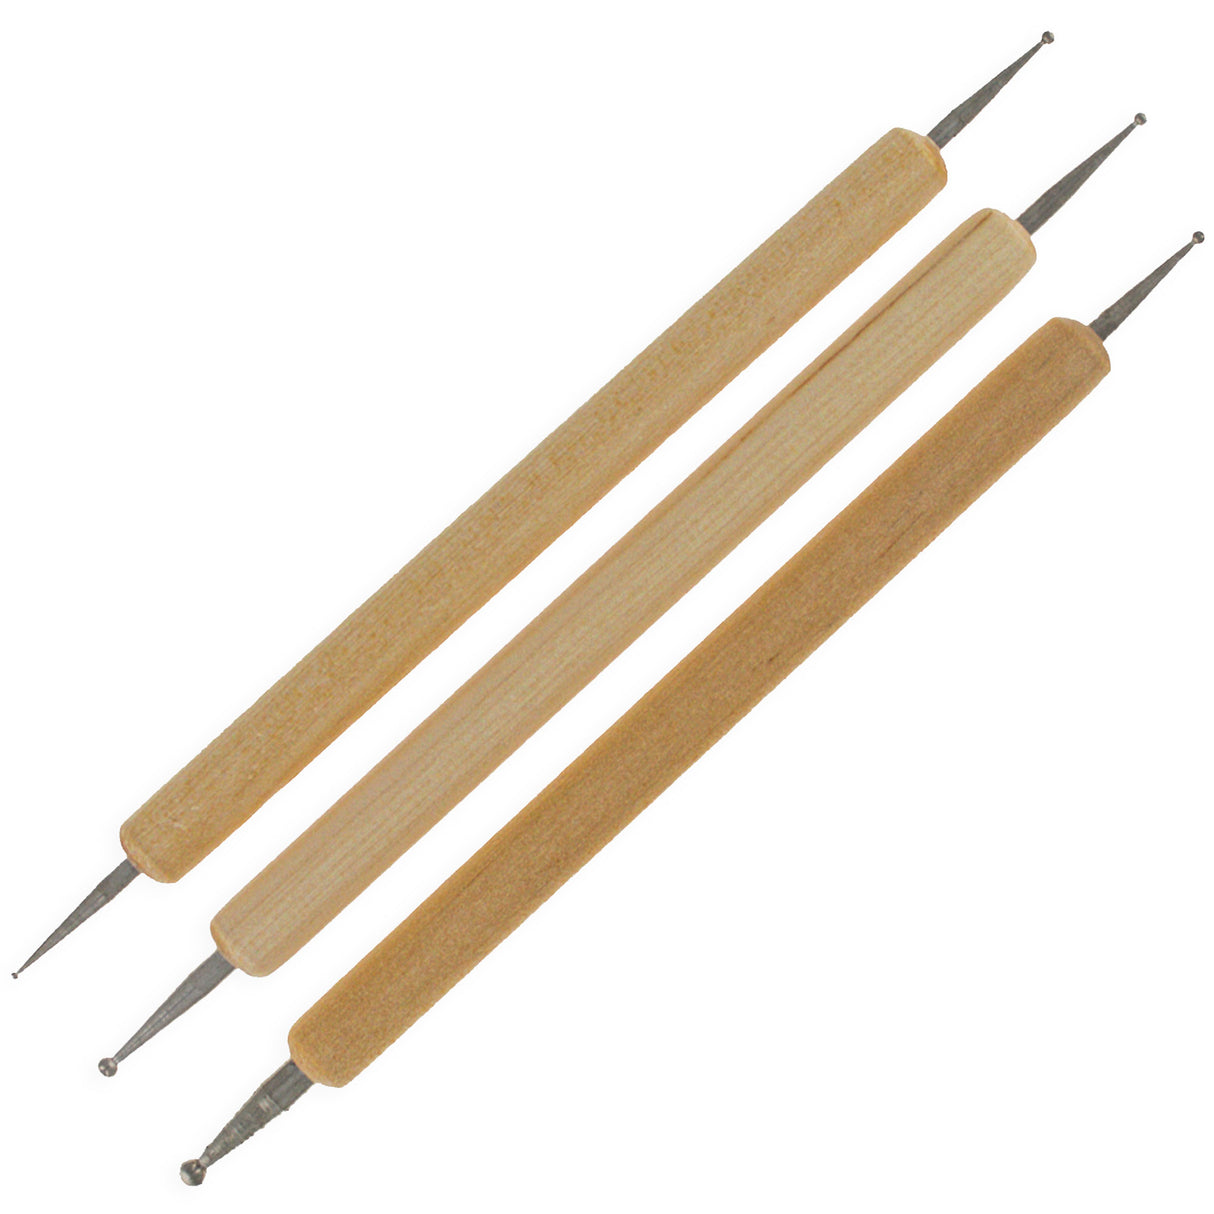 Set of 3 Double Sided Drop Pull Tools for Pysanky Easter Decorating in Beige color,  shape